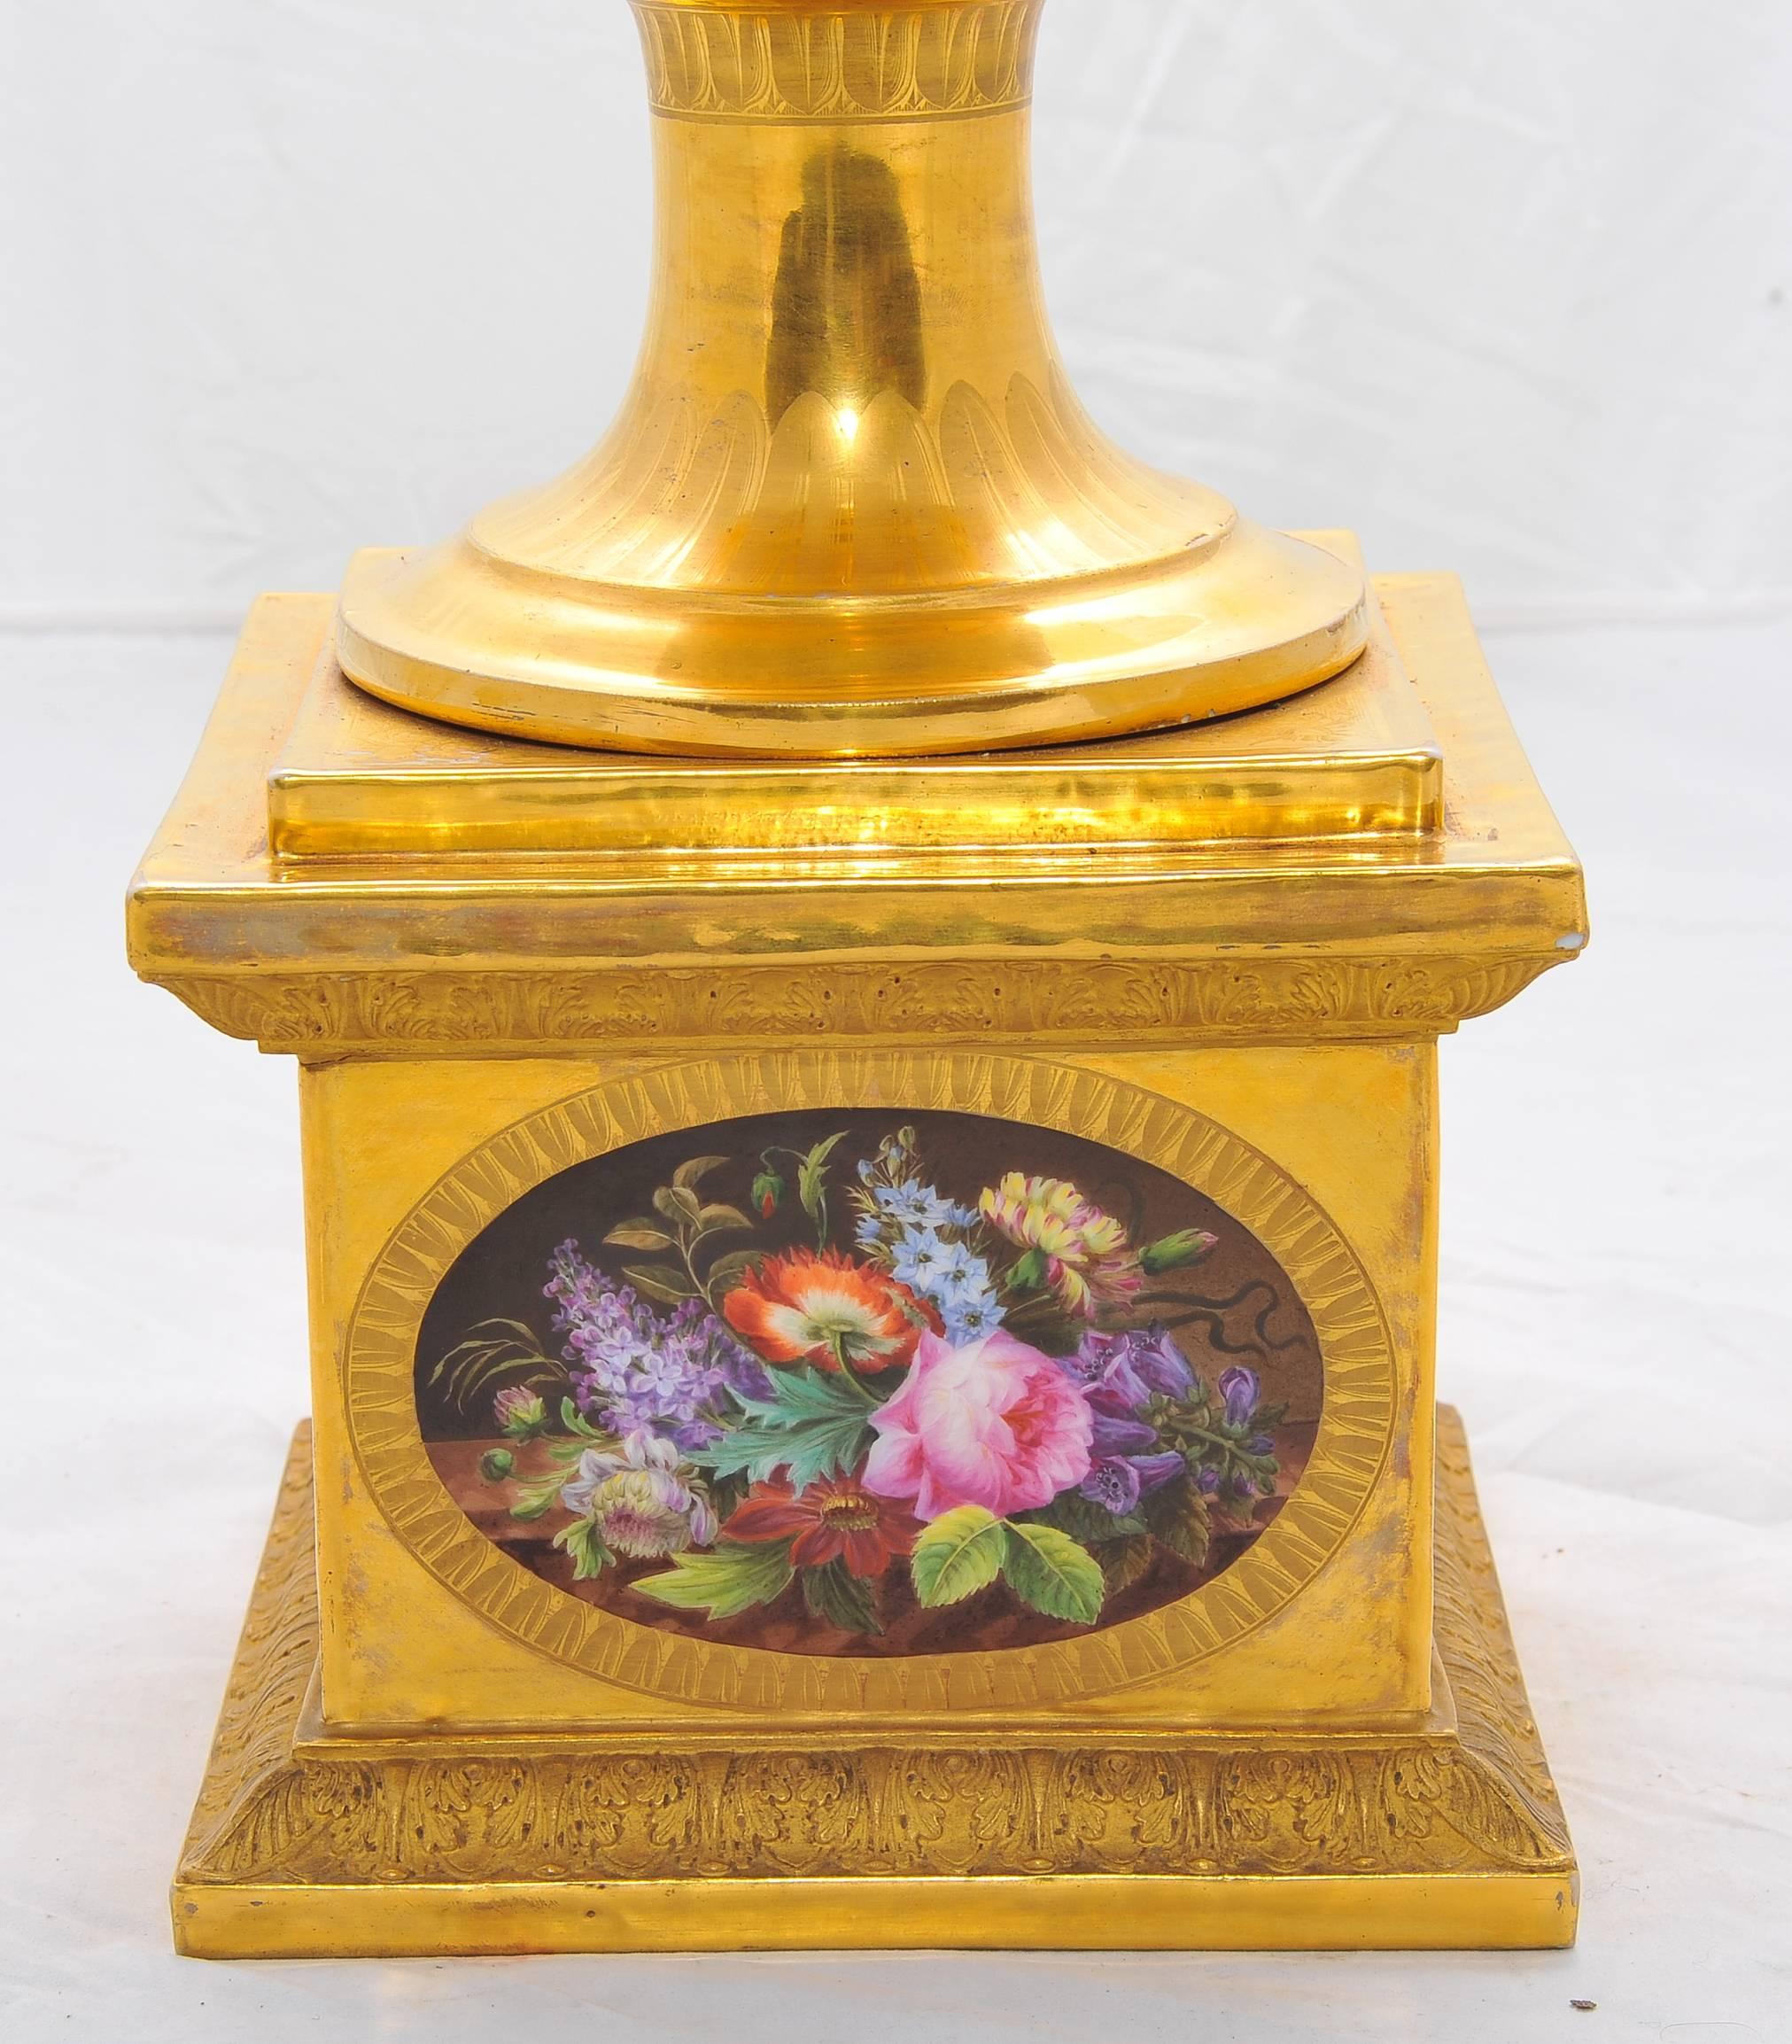 A very large and impressive fine quality 19th century, Paris porcelain vase on stand. Having wonderful gilded two-tone background, two scrolling handles each with inset plaques of cherubs riding on the backs of swans, terminating in Mercury form